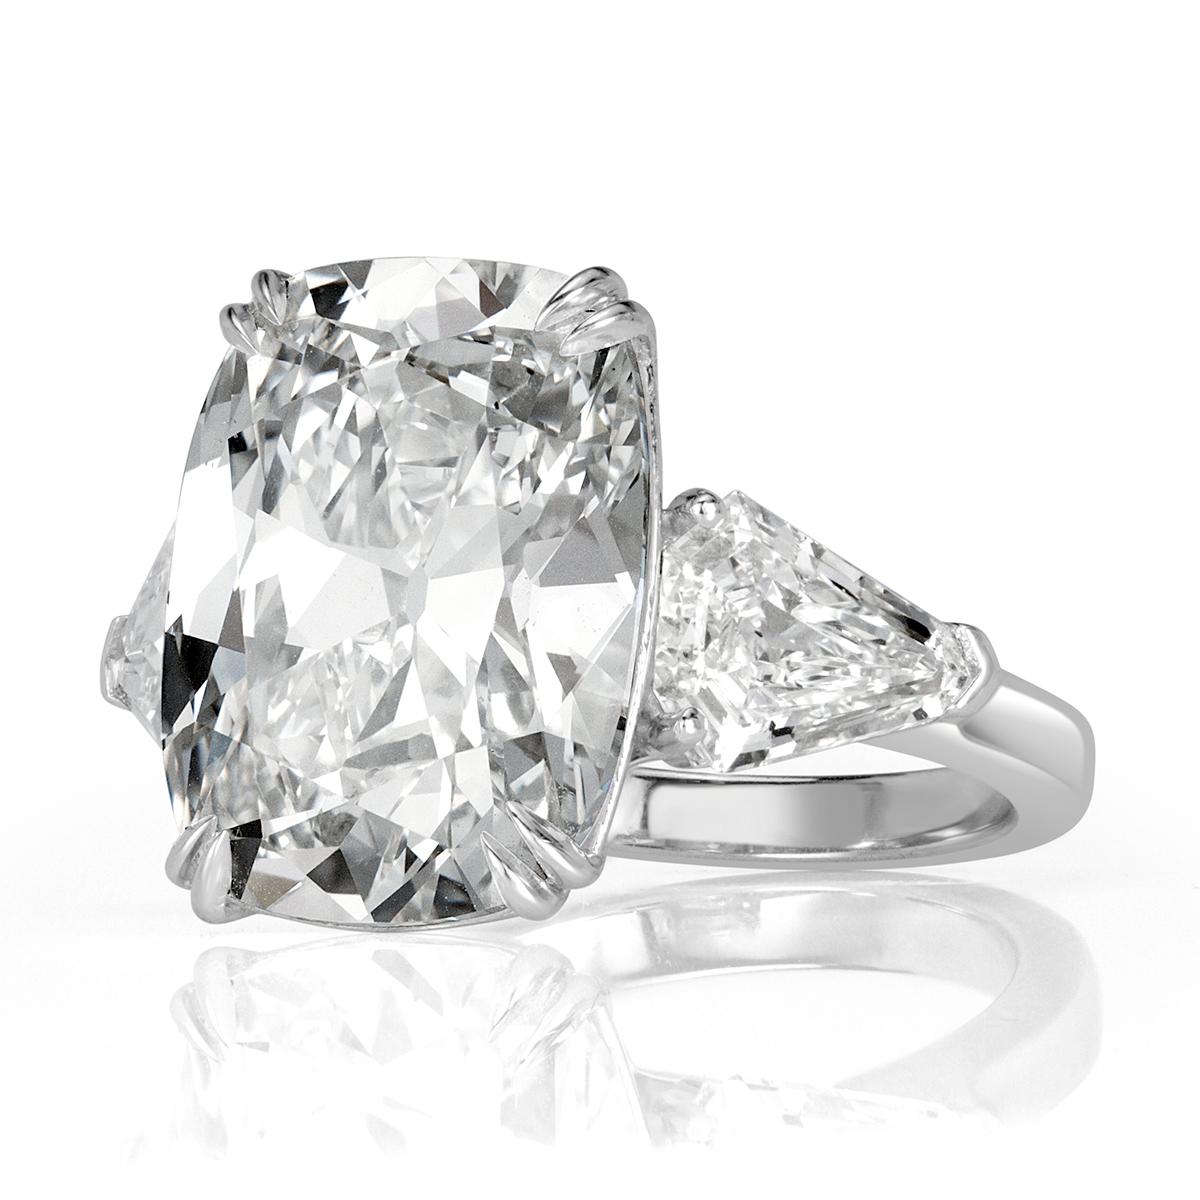 Custom created in platinum, this superb diamond engagement ring showcases a one of a kind 10.31ct old Mine cut center diamond, GIA certified at H-VS1. It has a stunning cut and sparkles with tremendous brilliance. It is complimented by two shield